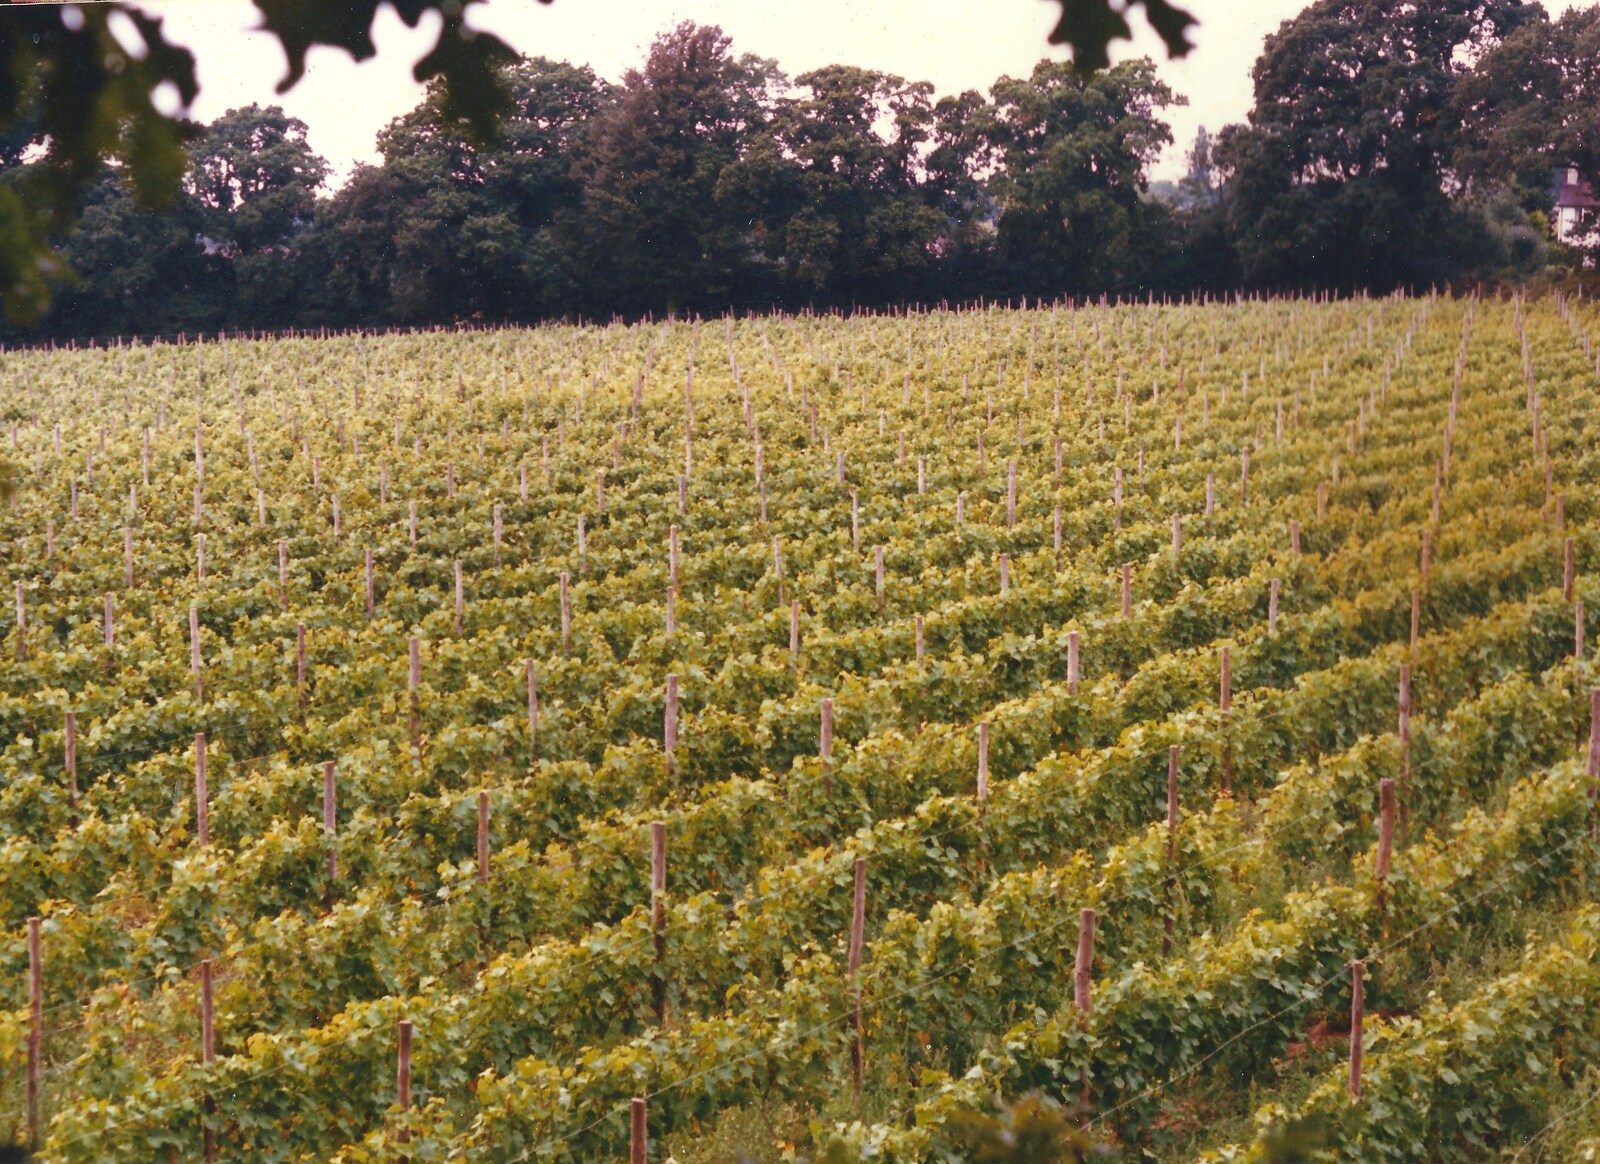 Nosher's 1989 photo of the vineyard from up a tree from Constructing a Vineyard, Harrow Road, Bransgore, Dorset - 1st September 1981